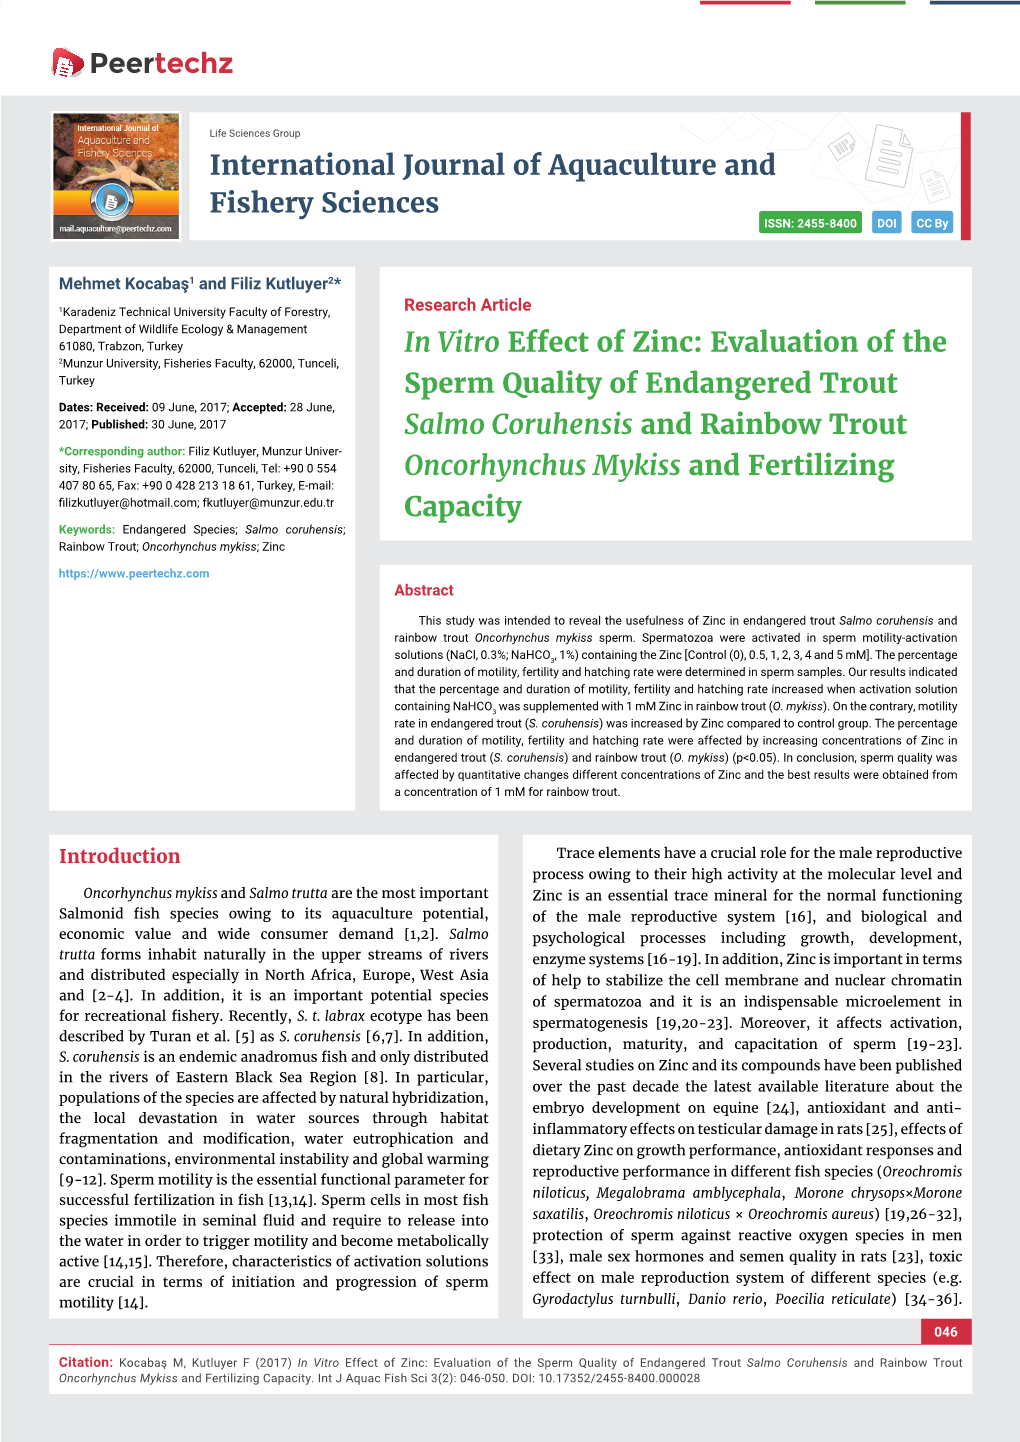 Evaluation of the Sperm Quality of Endangered Trout Salmo Coruhensis and Rainbow Trout Oncorhynchus Mykiss and Fertilizing Capacity